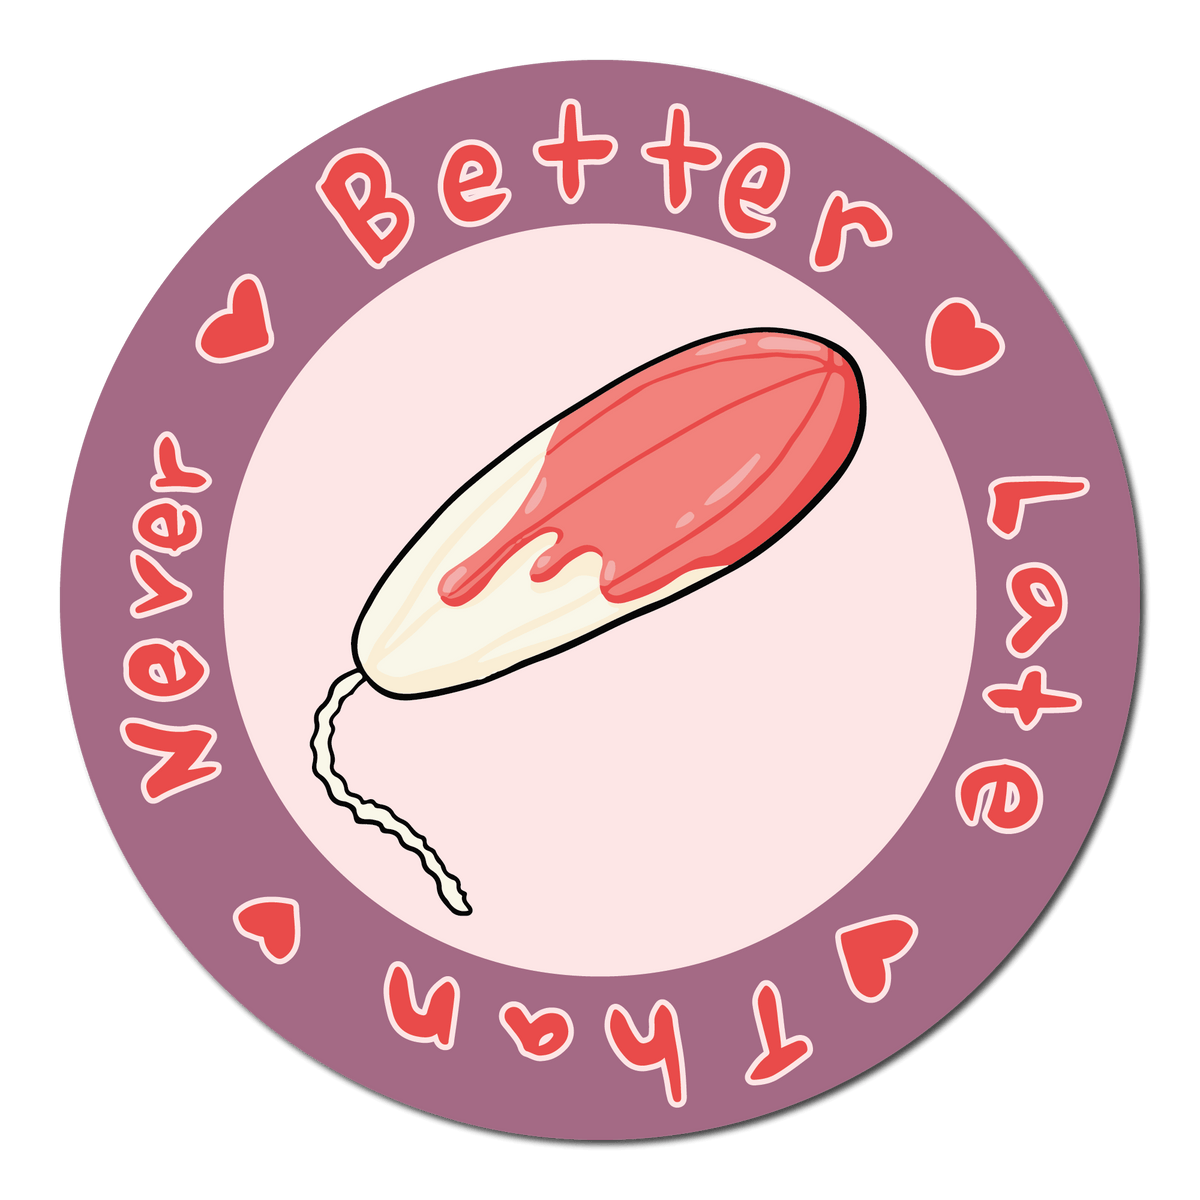 Small Circle Sticker with a bloody tampon in the middle and text saying Better Late Than Never around the outside with hearts separating each word